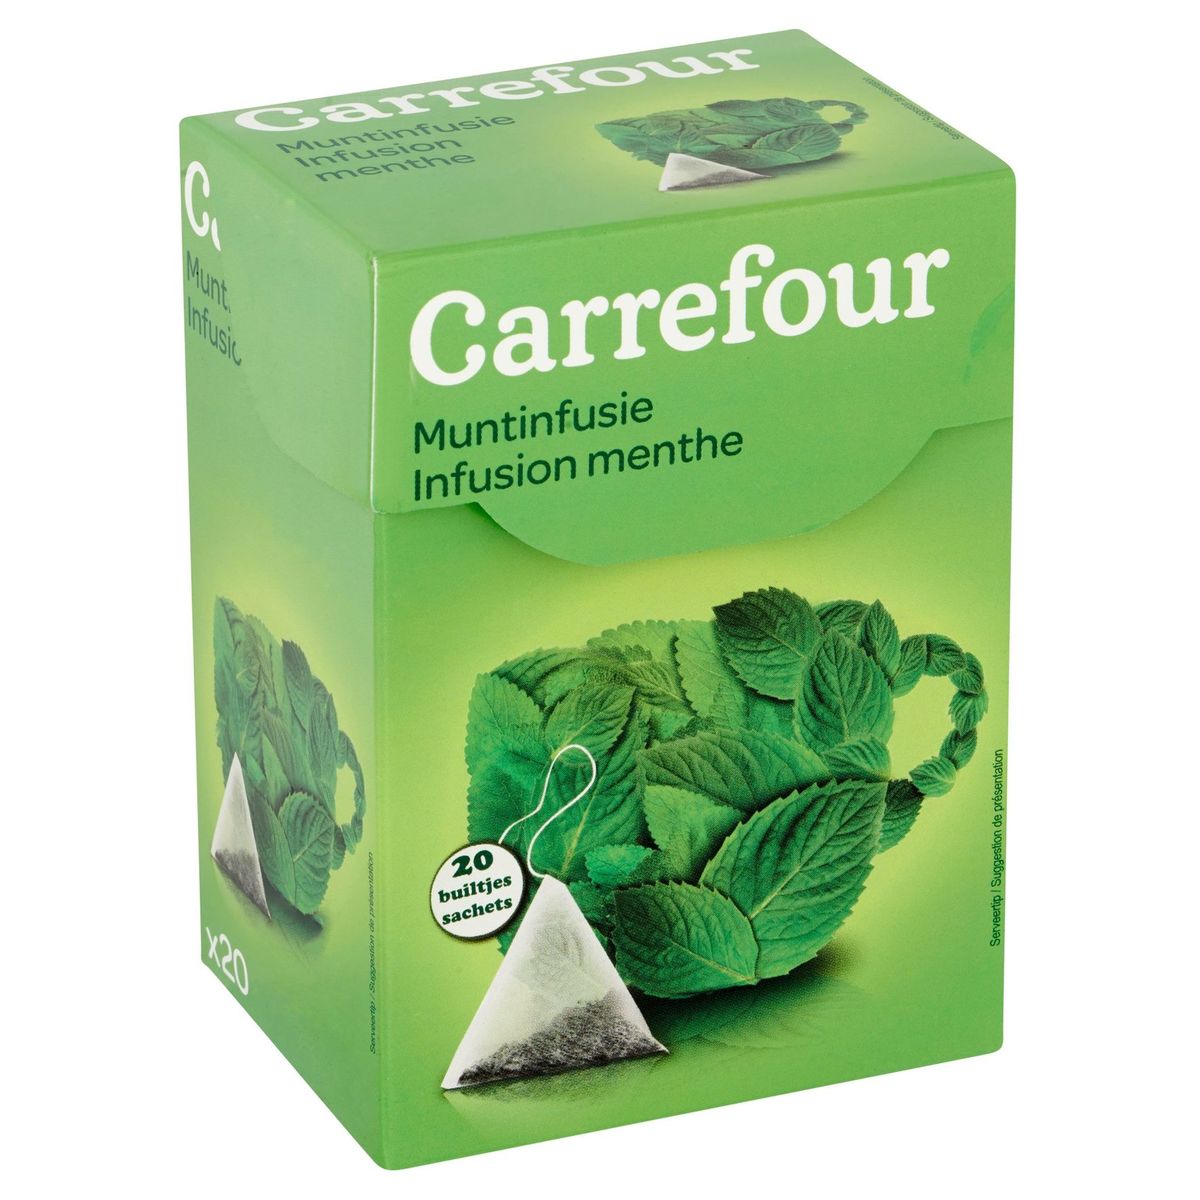 Carrefour Muntinfusie 20 x 1.7 g